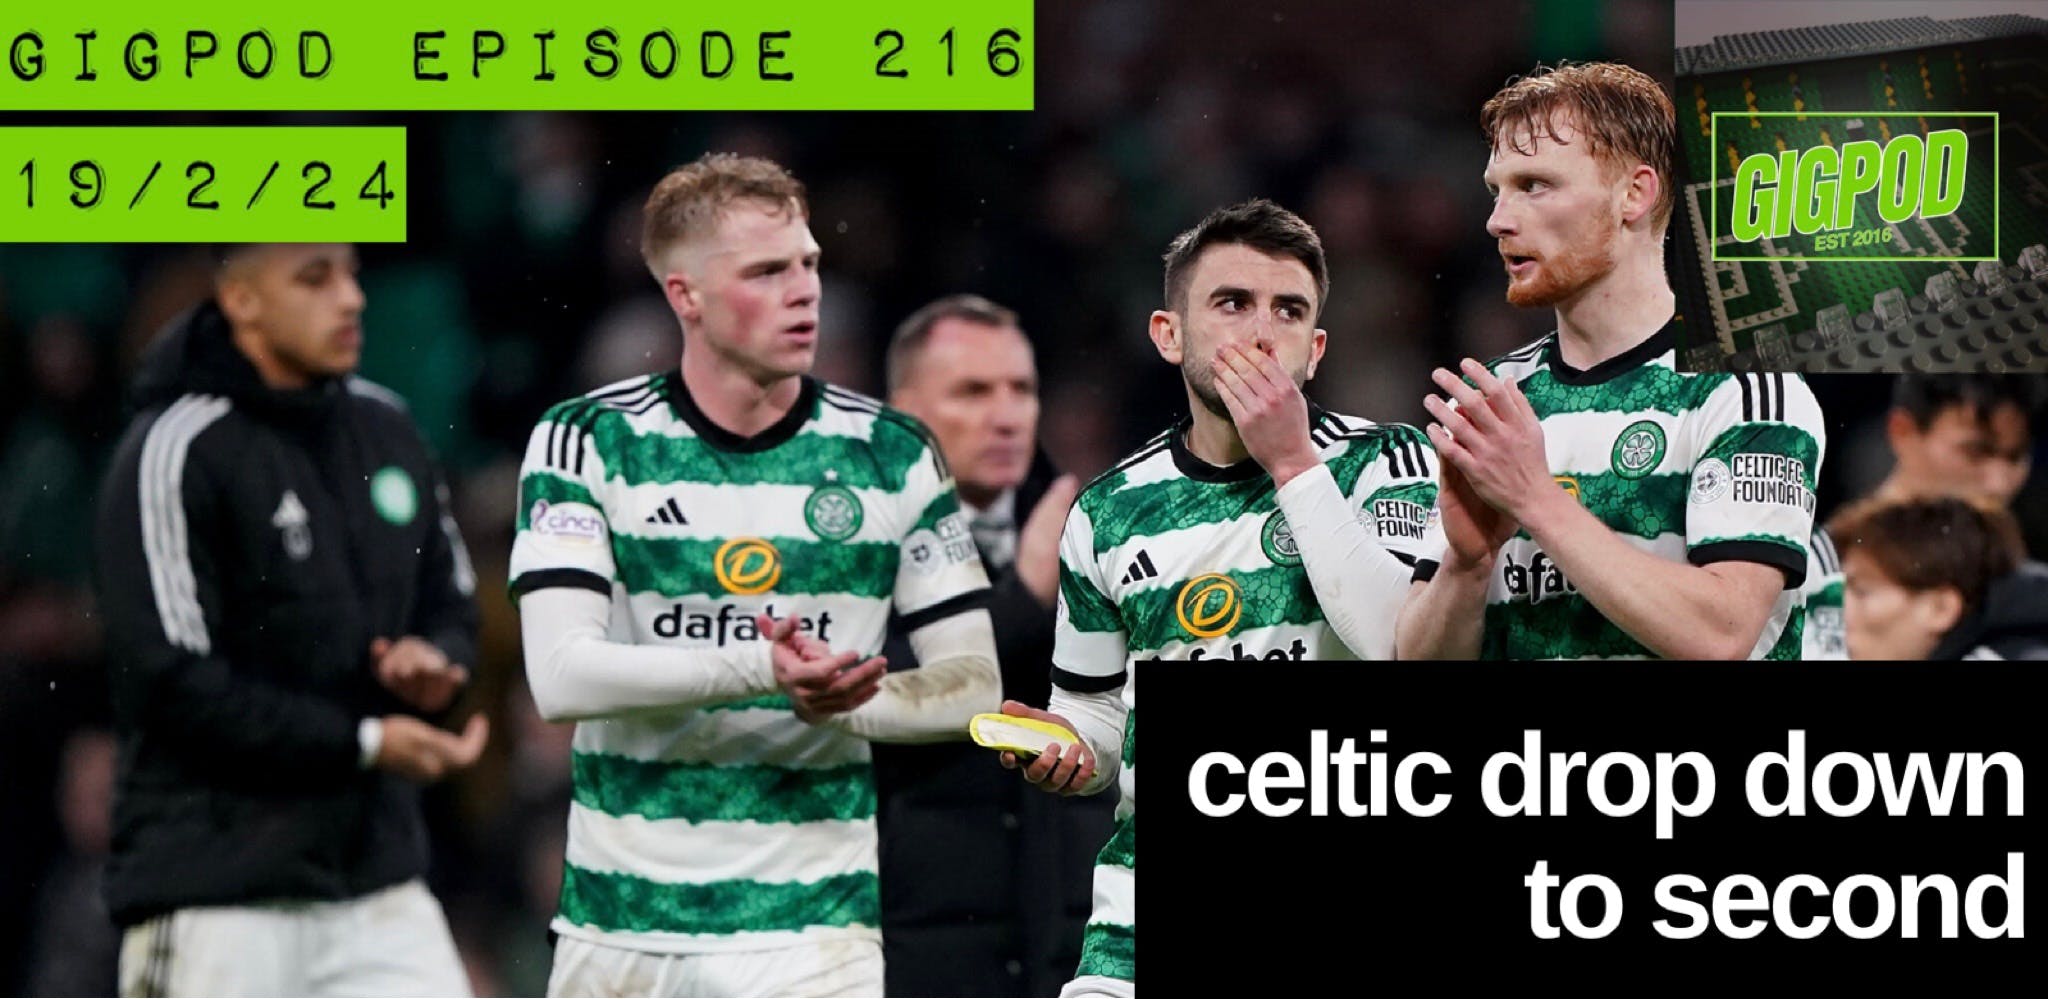 GIGPOD EP 216: CELTIC DROP DOWN TO SECOND